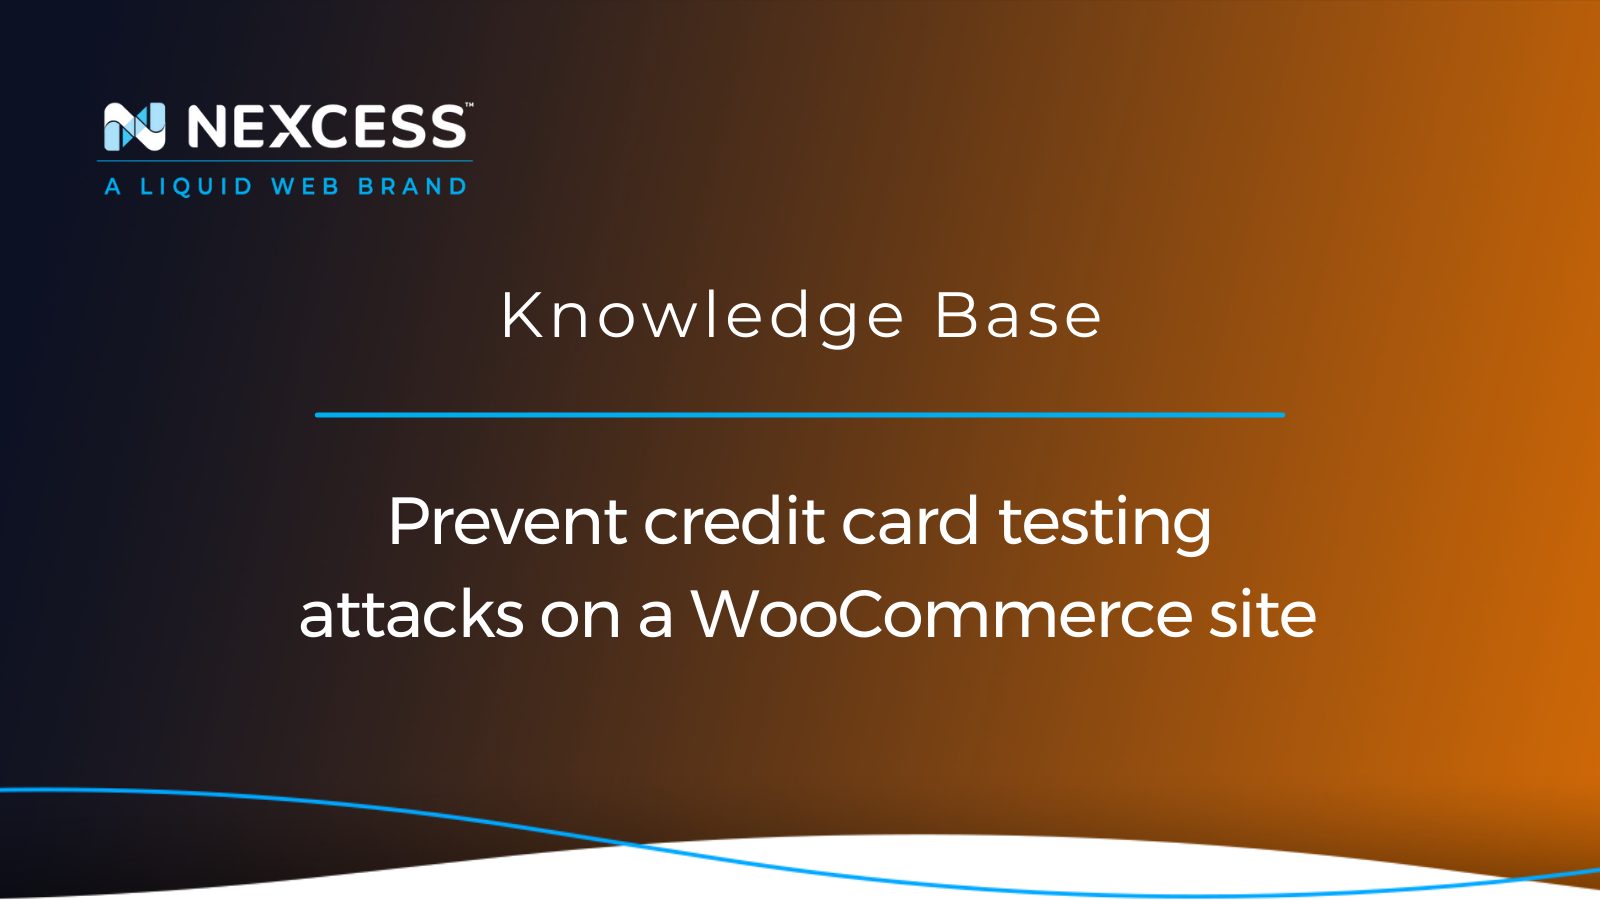 Prevent credit card testing attacks on a WooCommerce site